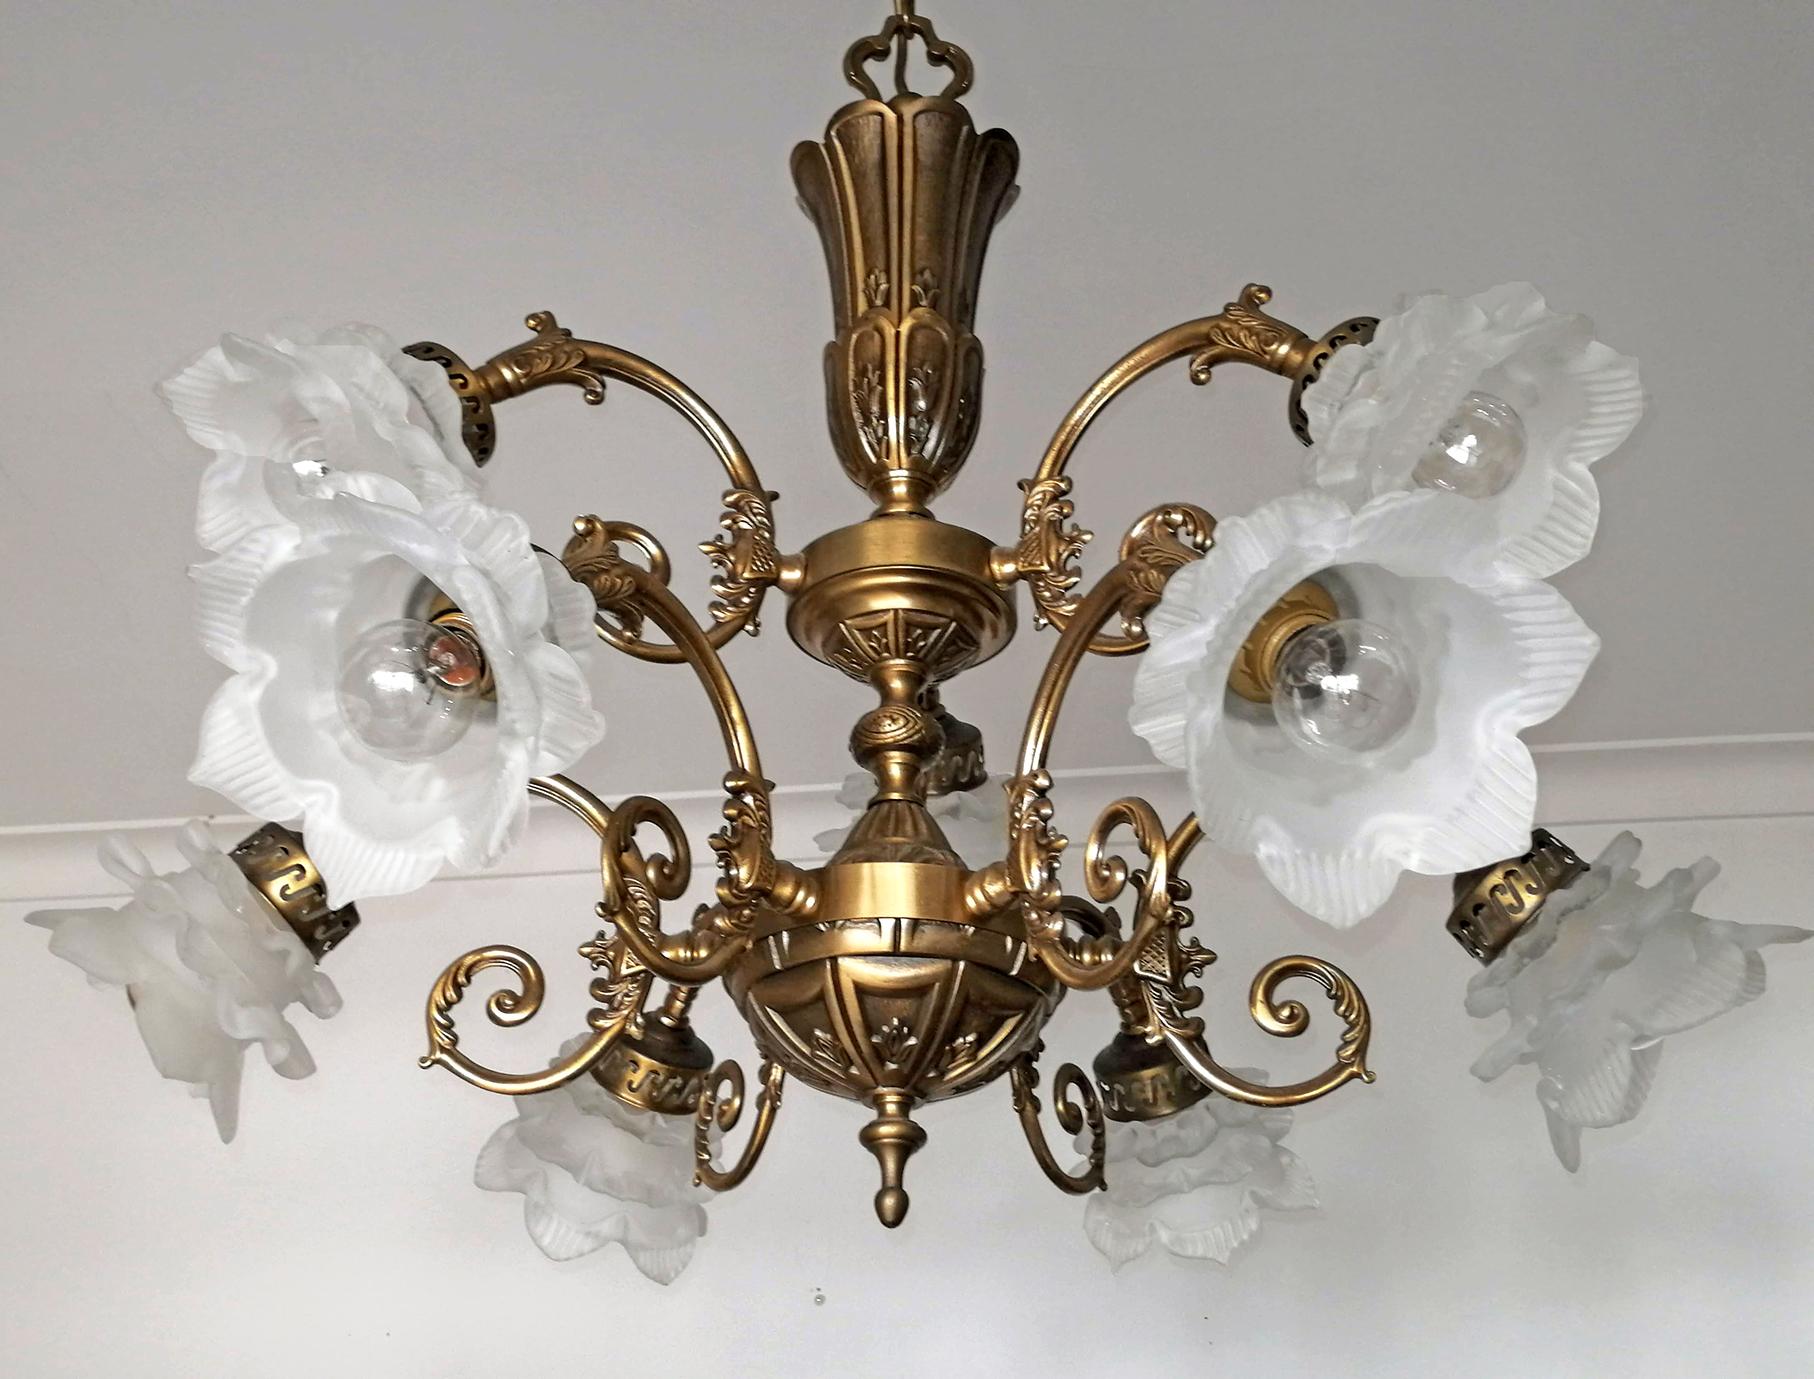 Ornate French Art Nouveau and Art Deco 2 tiers, frosted satin art glass flower petal lamp shades chandelier

Measures:
Diameter 29.5 in/ 75 cm
Height 33.4 in / 85 cm
Weight 15 Kg / 32 lb
9-light bulbs E14 good working condition
Assembly required.